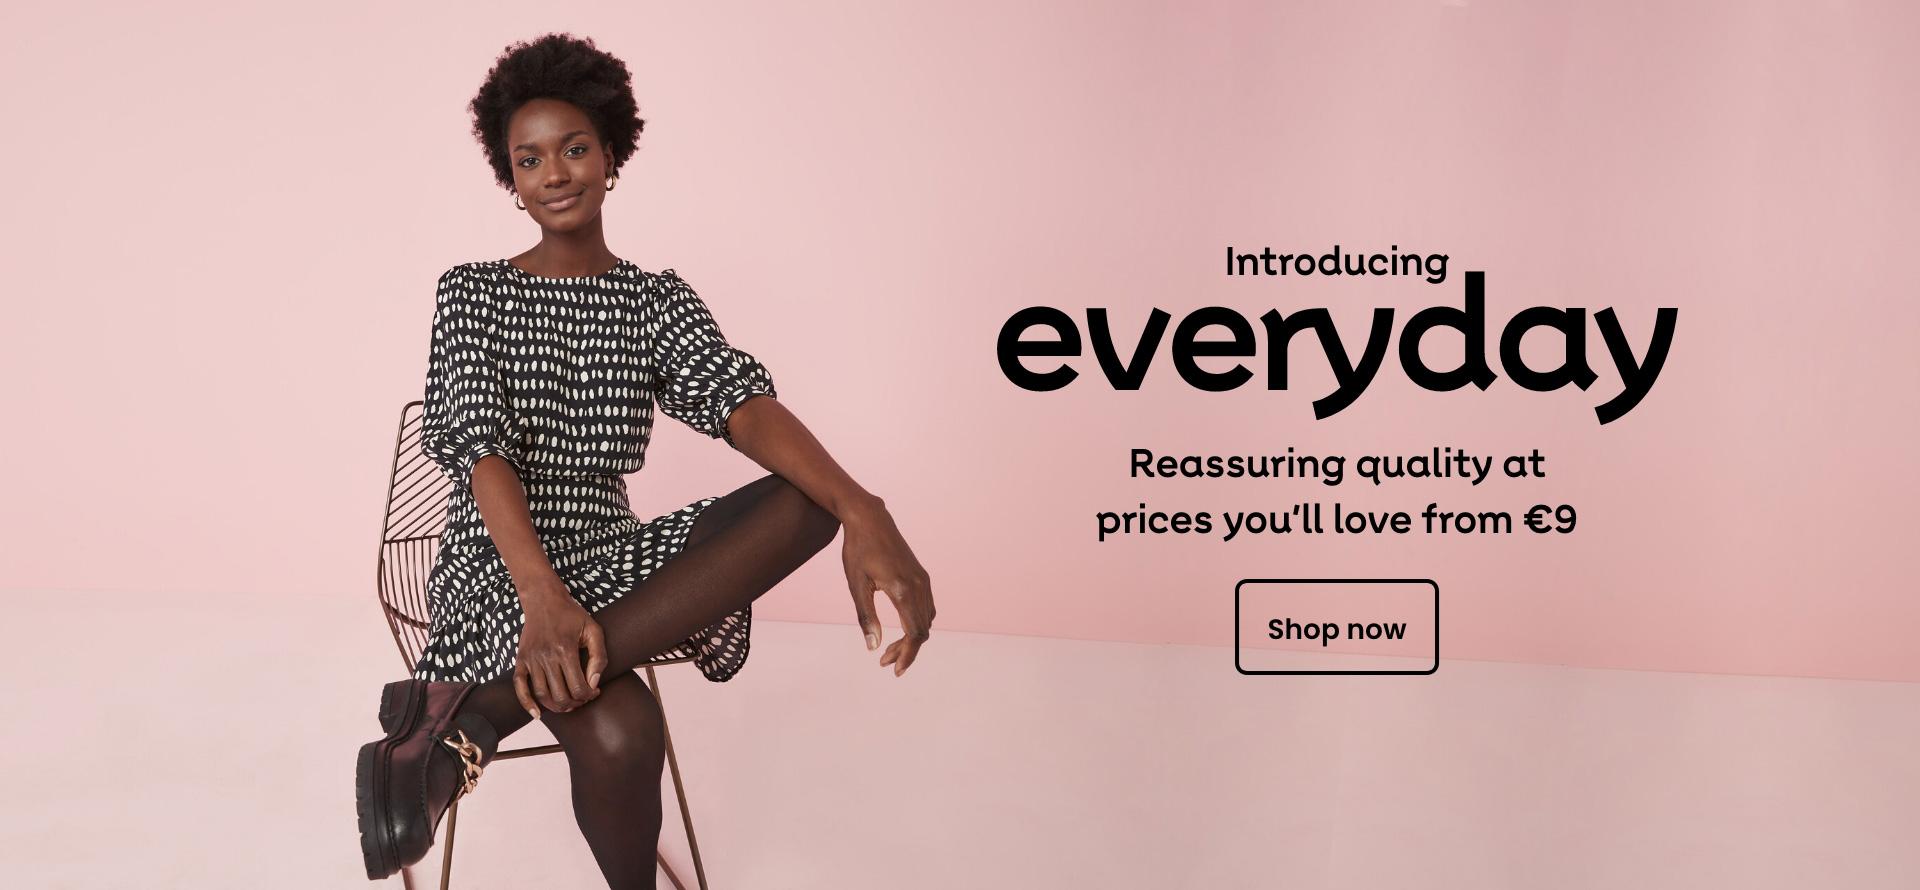 Introducing Everyday Reassuring quality at prices you’ll love from €9